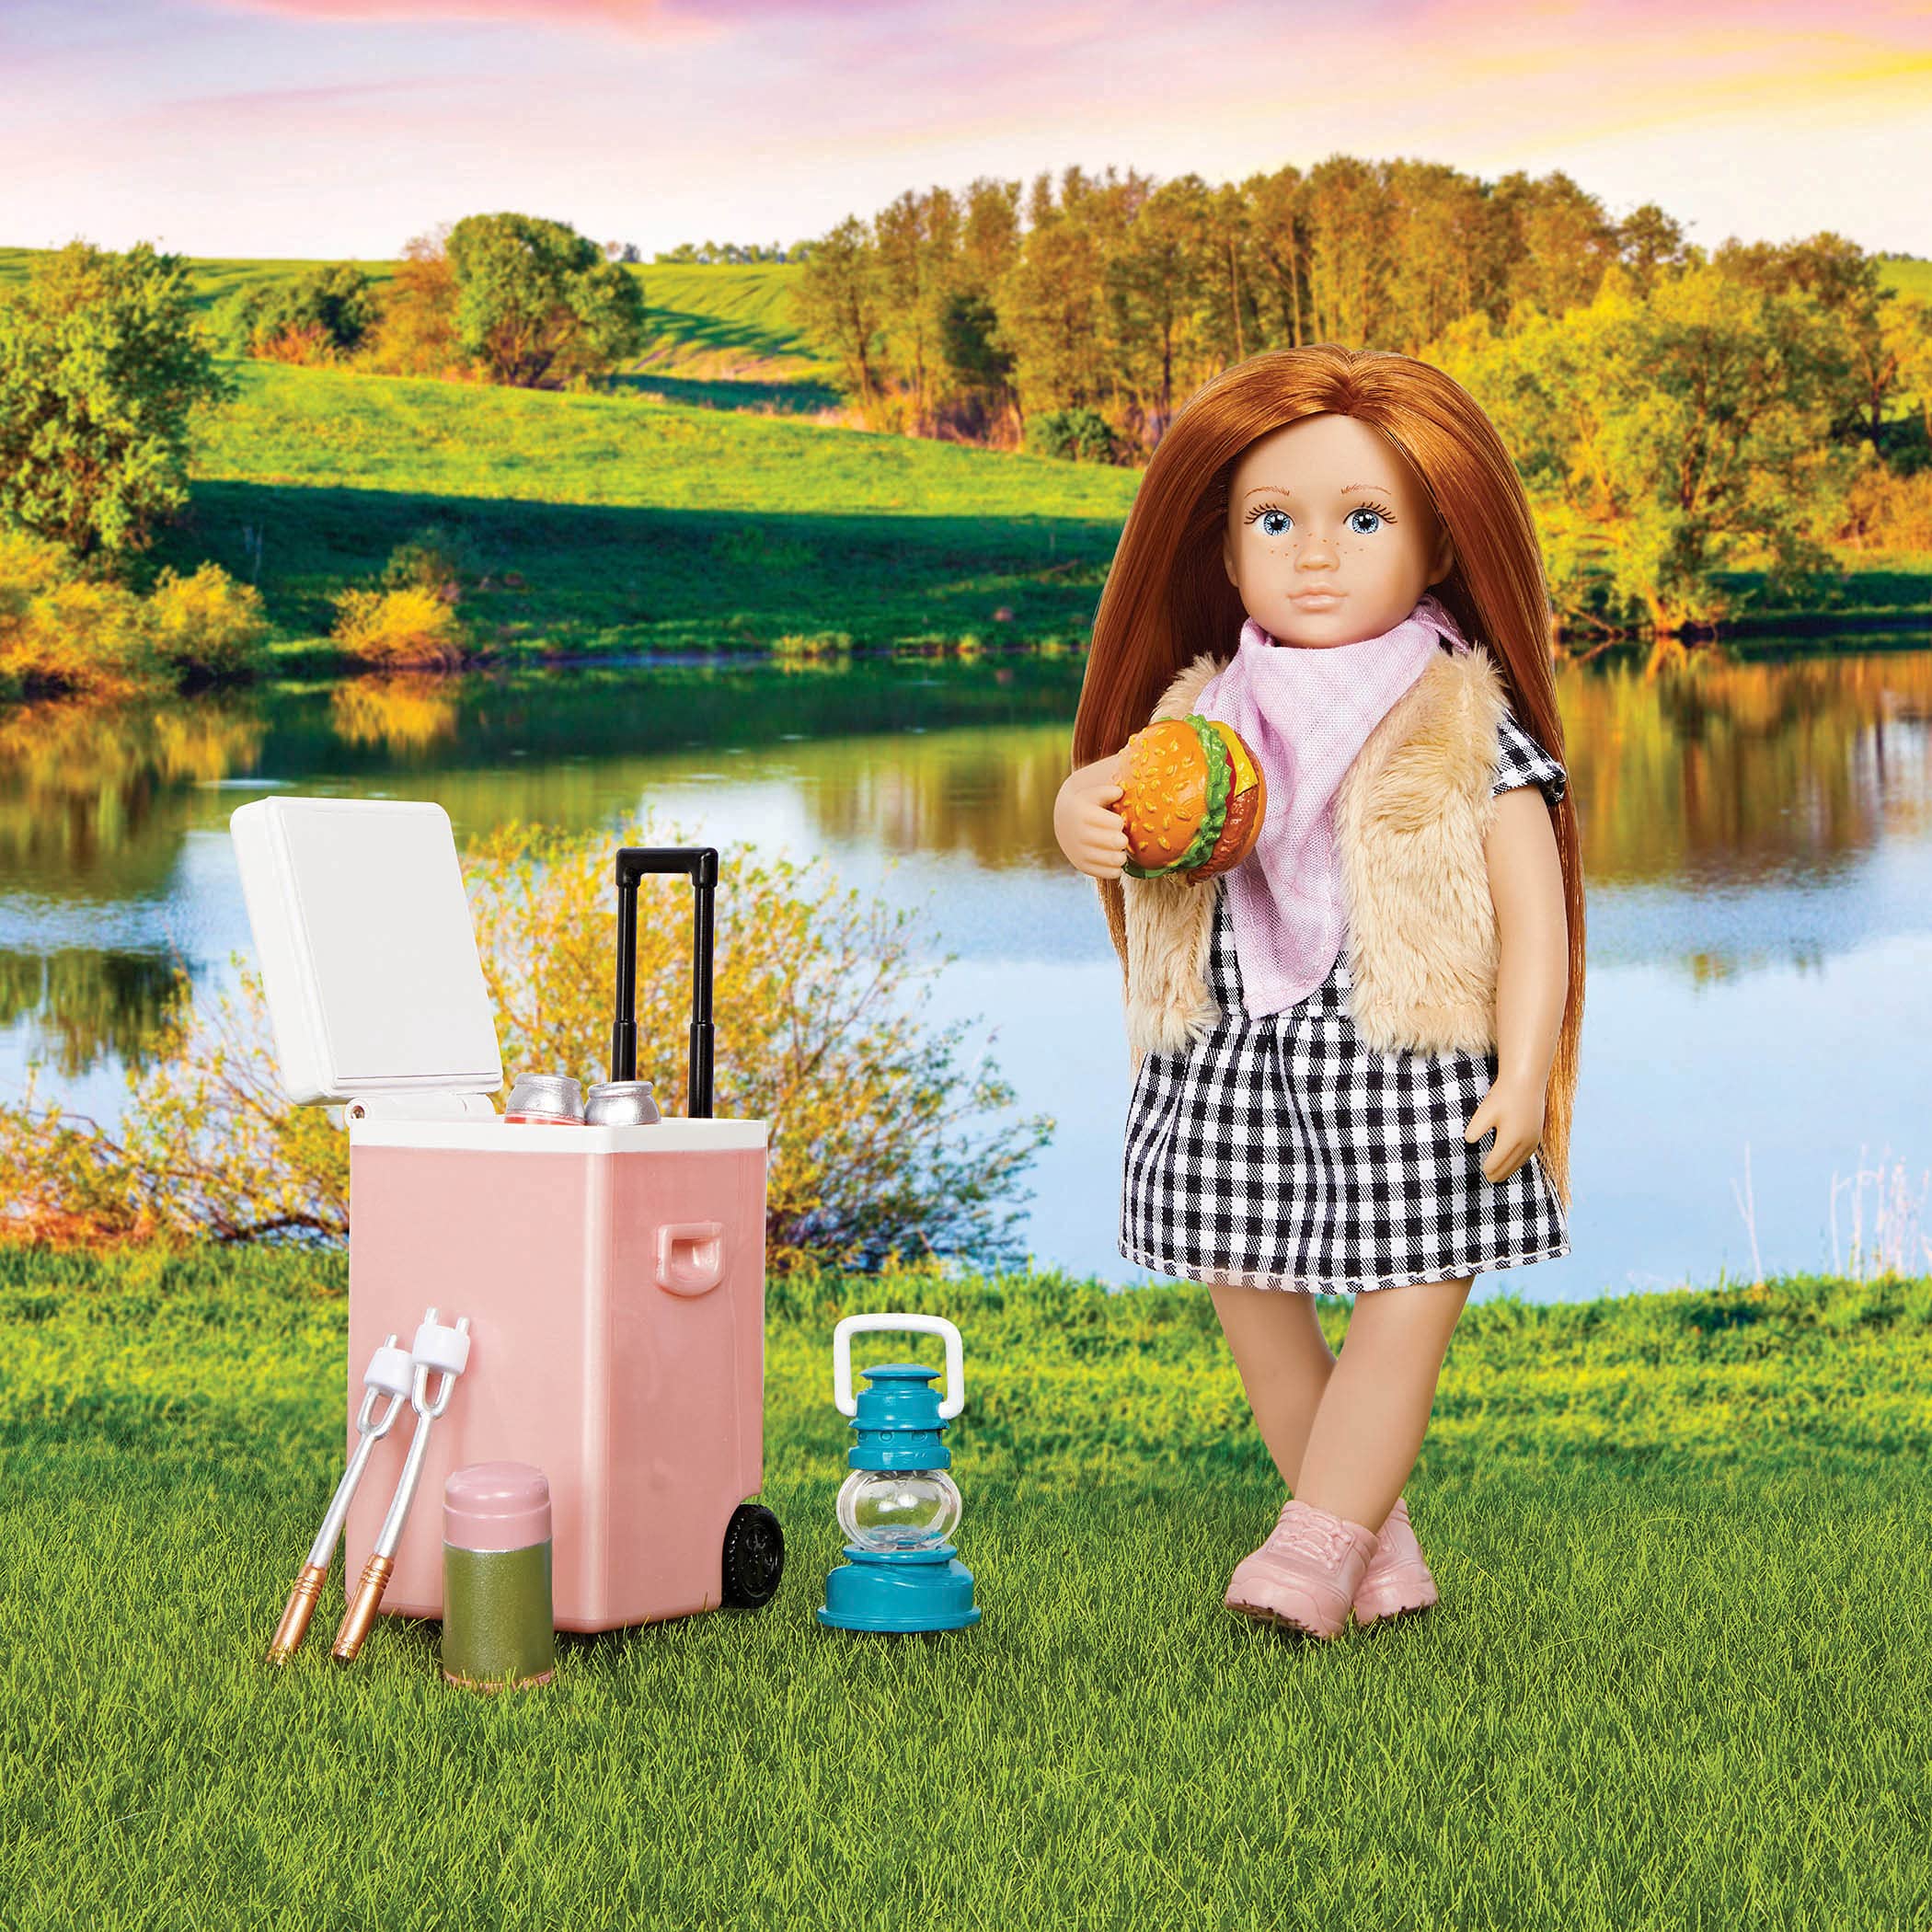 Lori Dolls – Jessa’s Camp Set – Mini Doll & Camping Set – Clothes & Accessories for 6-inch Dolls – Play Food, Cooler, Map & More – Toys for Kids – 3 Years +